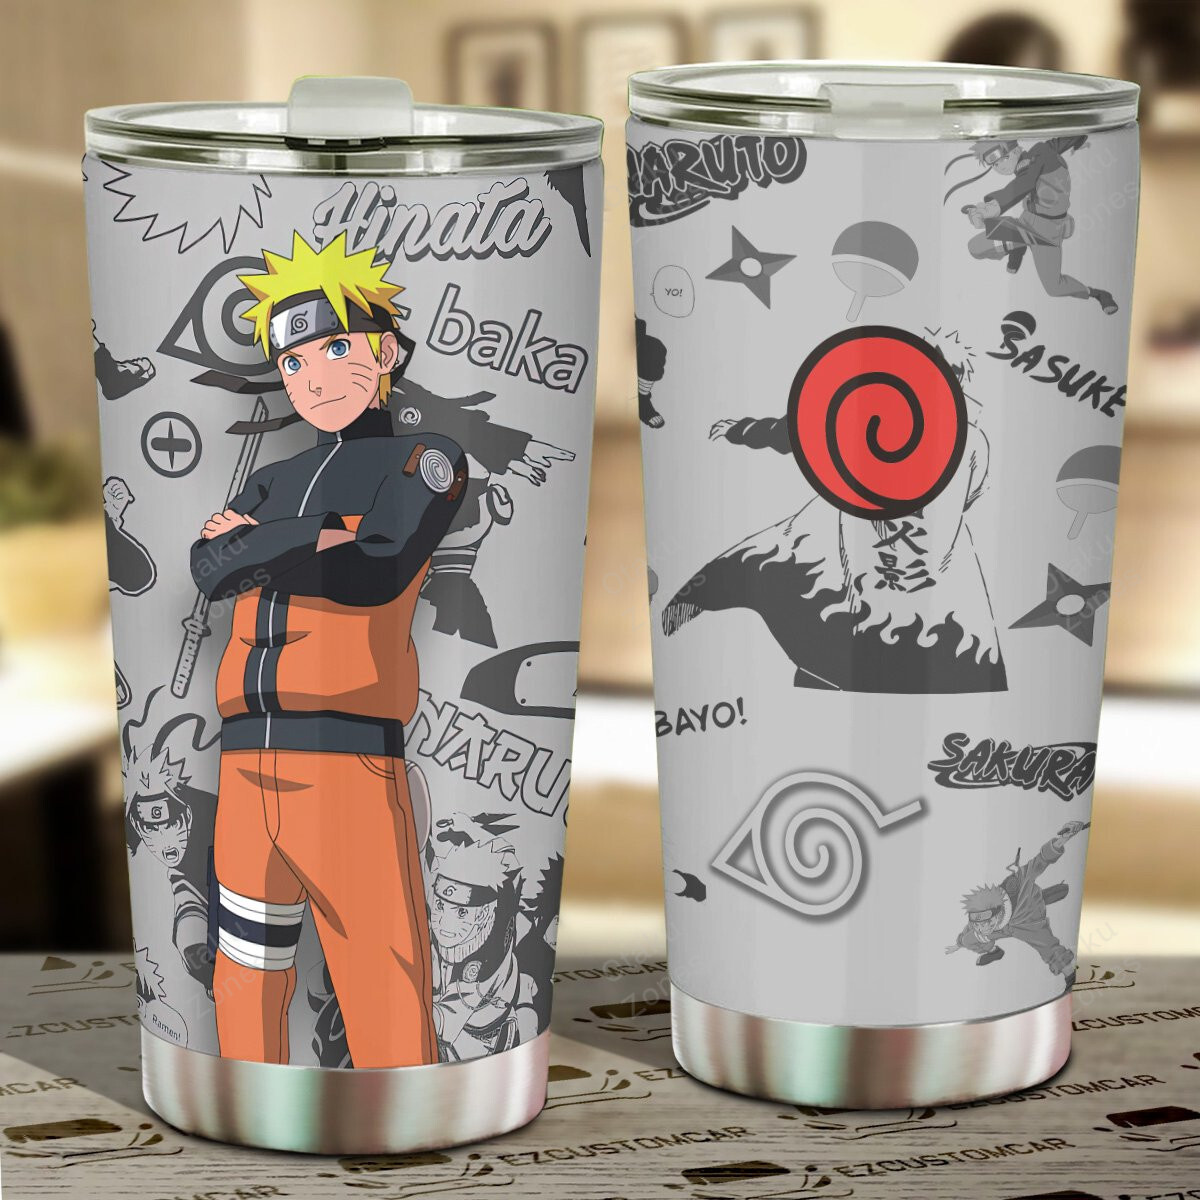 Go ahead and order your new tumbler now! 39